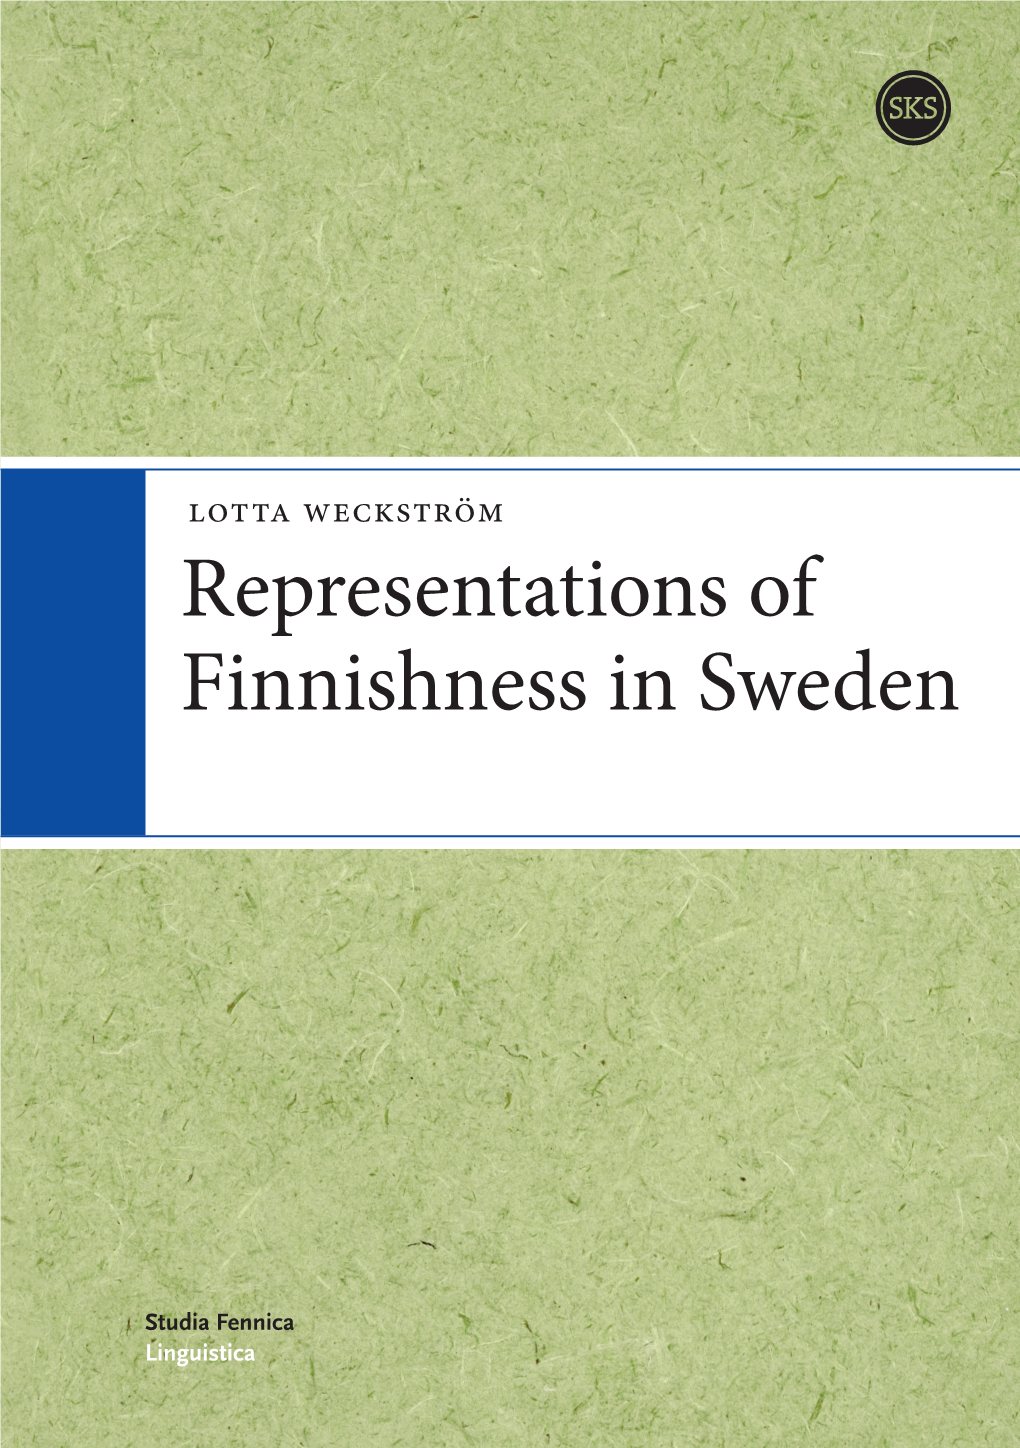 Representations of Finnishness in Sweden